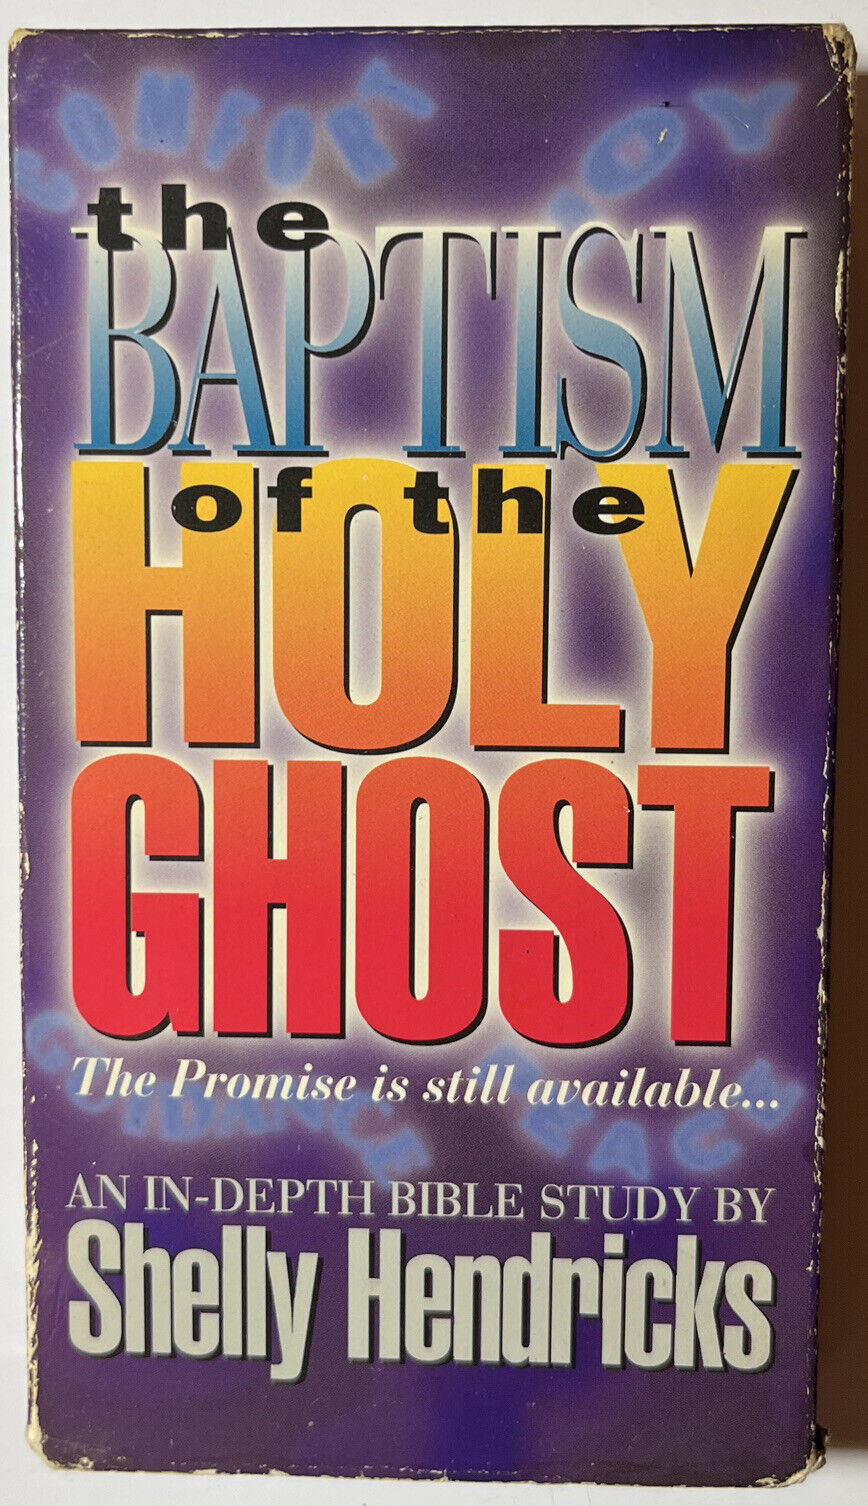 the Baptism of the Holy Ghost VHS With Shelly Hendricks